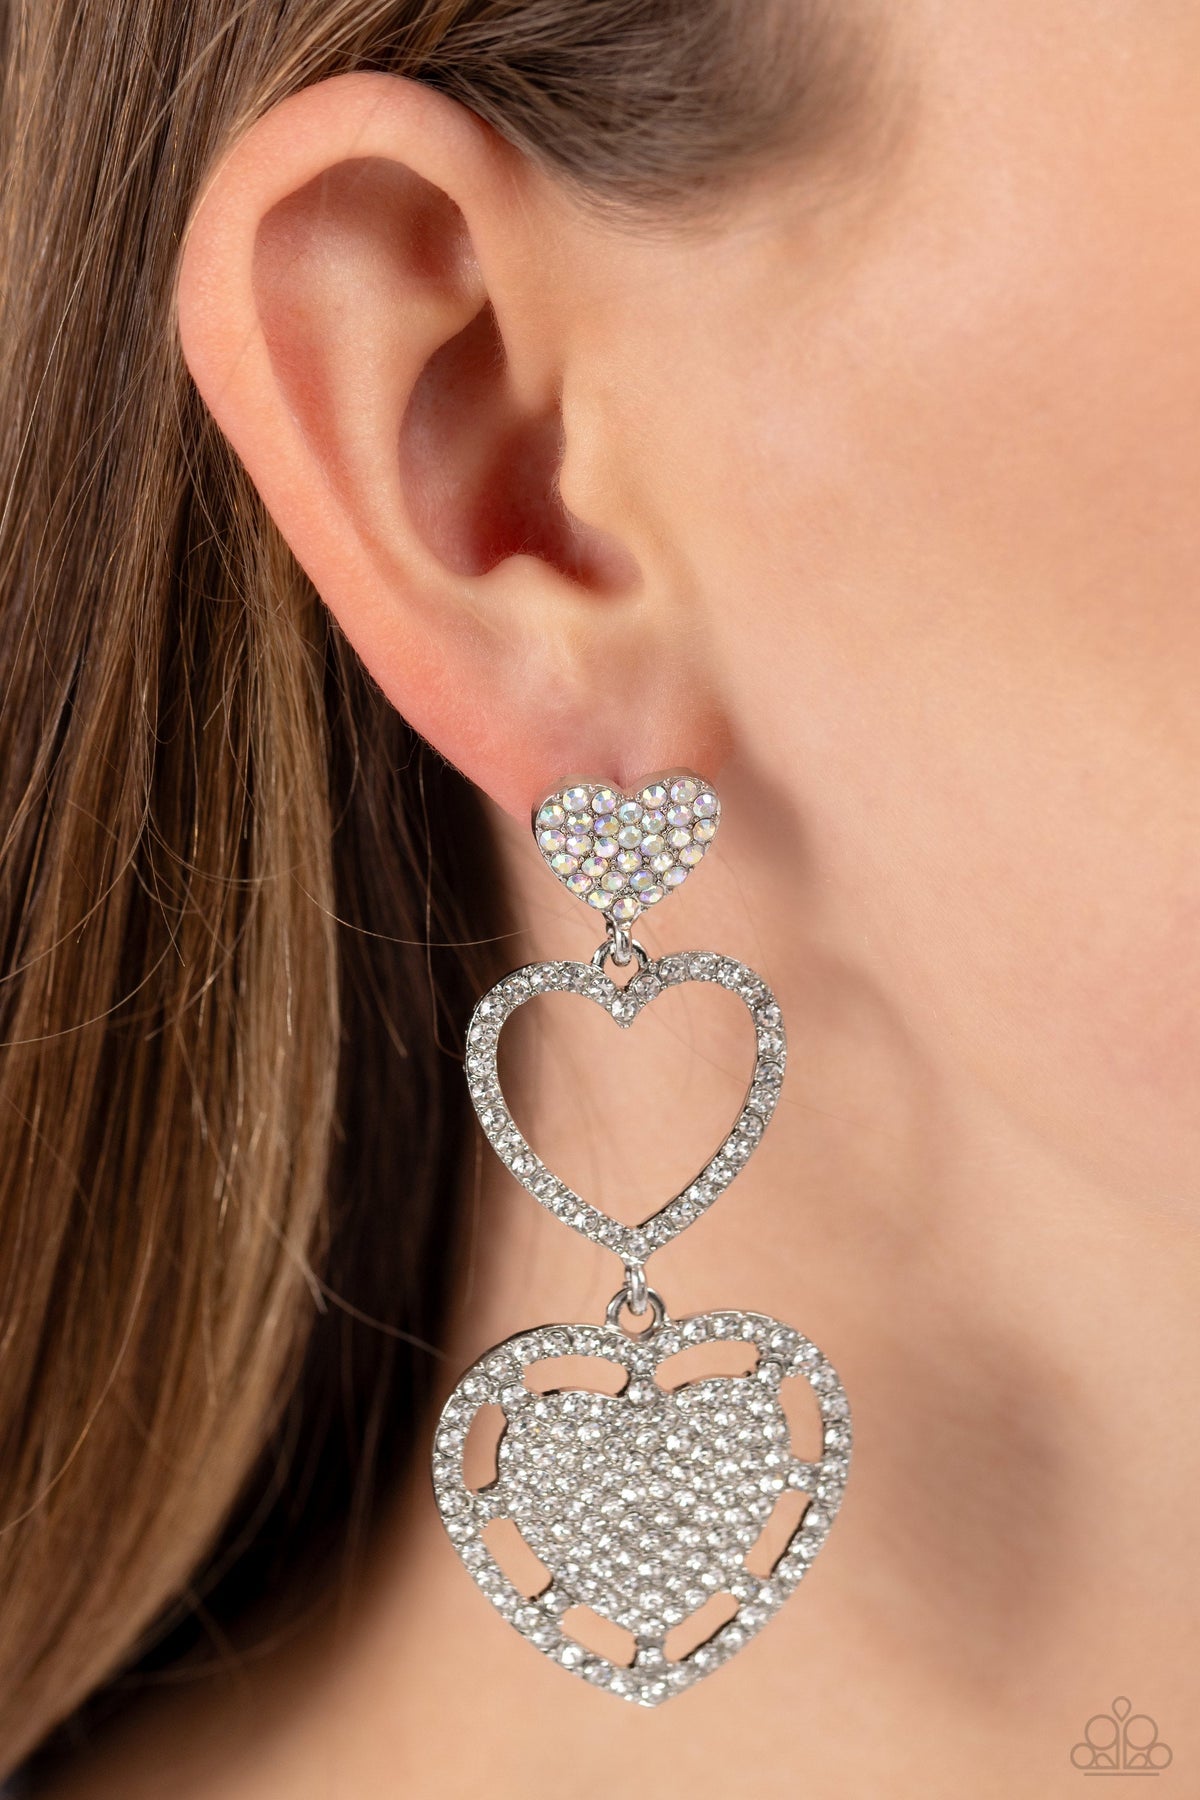 Couples Celebration White Rhinestone Heart Earrings - Paparazzi Accessories-on model - CarasShop.com - $5 Jewelry by Cara Jewels